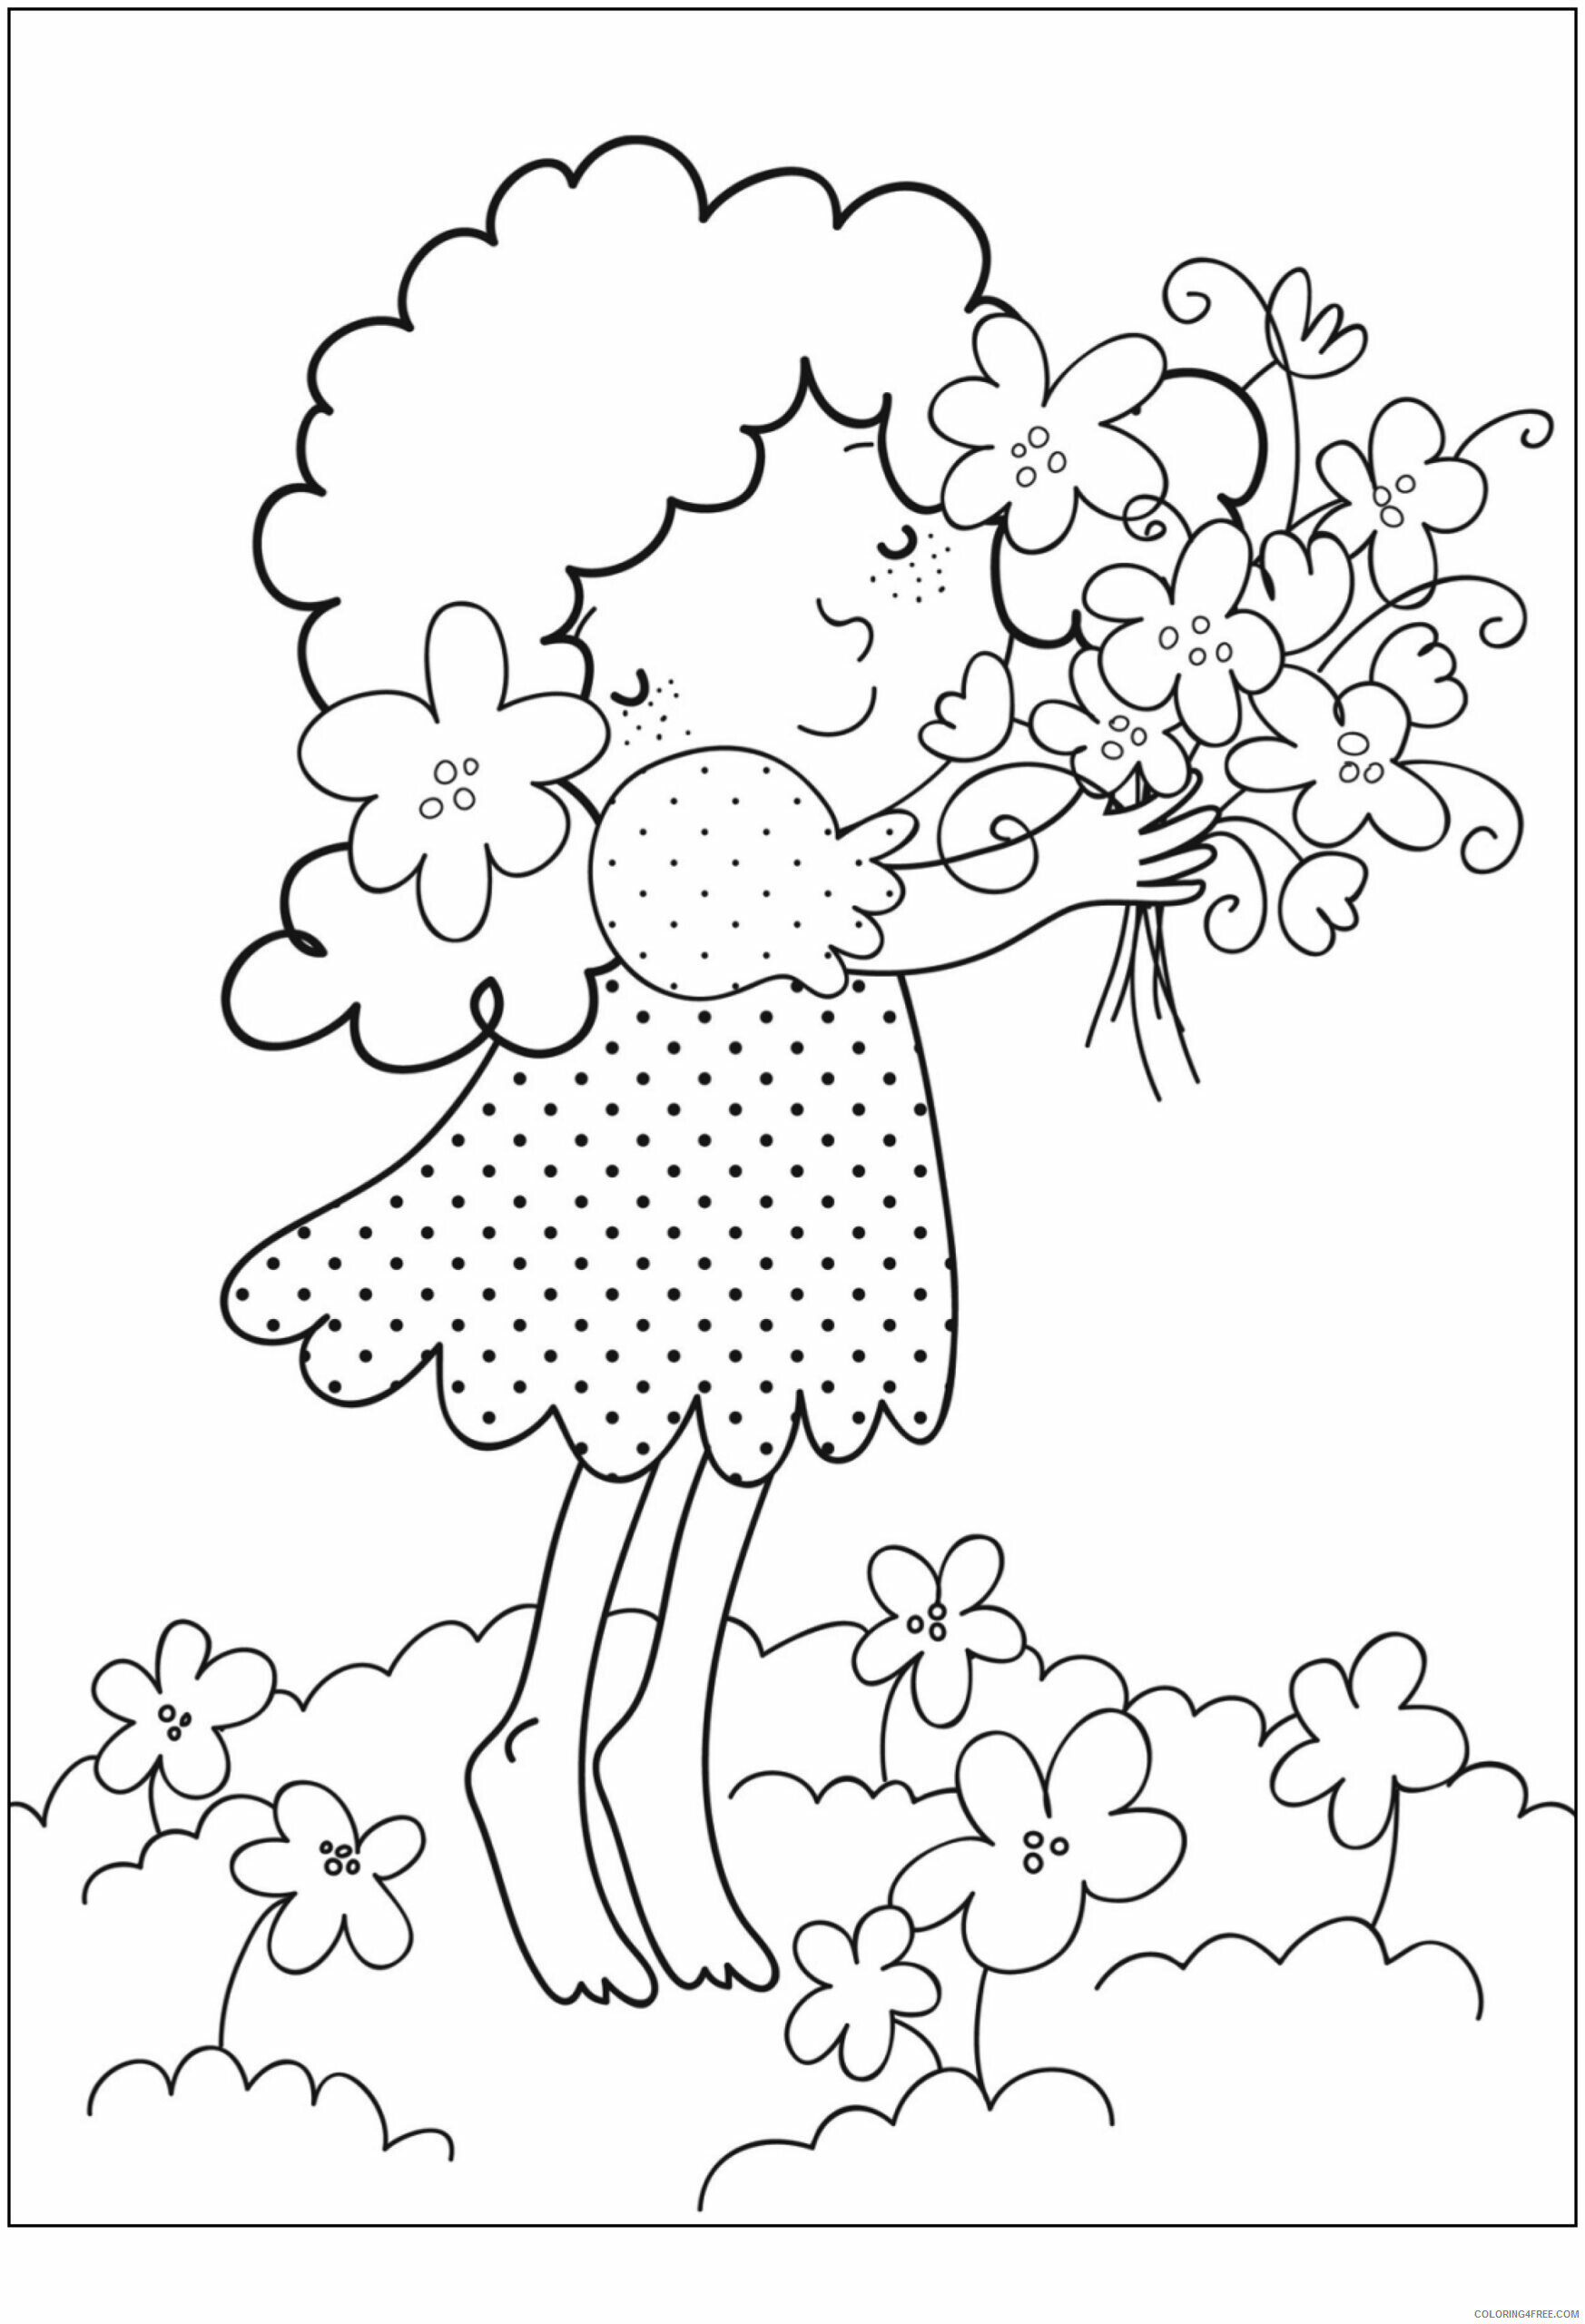 Flower Bouquet Coloring Pages Flowers Nature download flower Printable 2021 133 Coloring4free